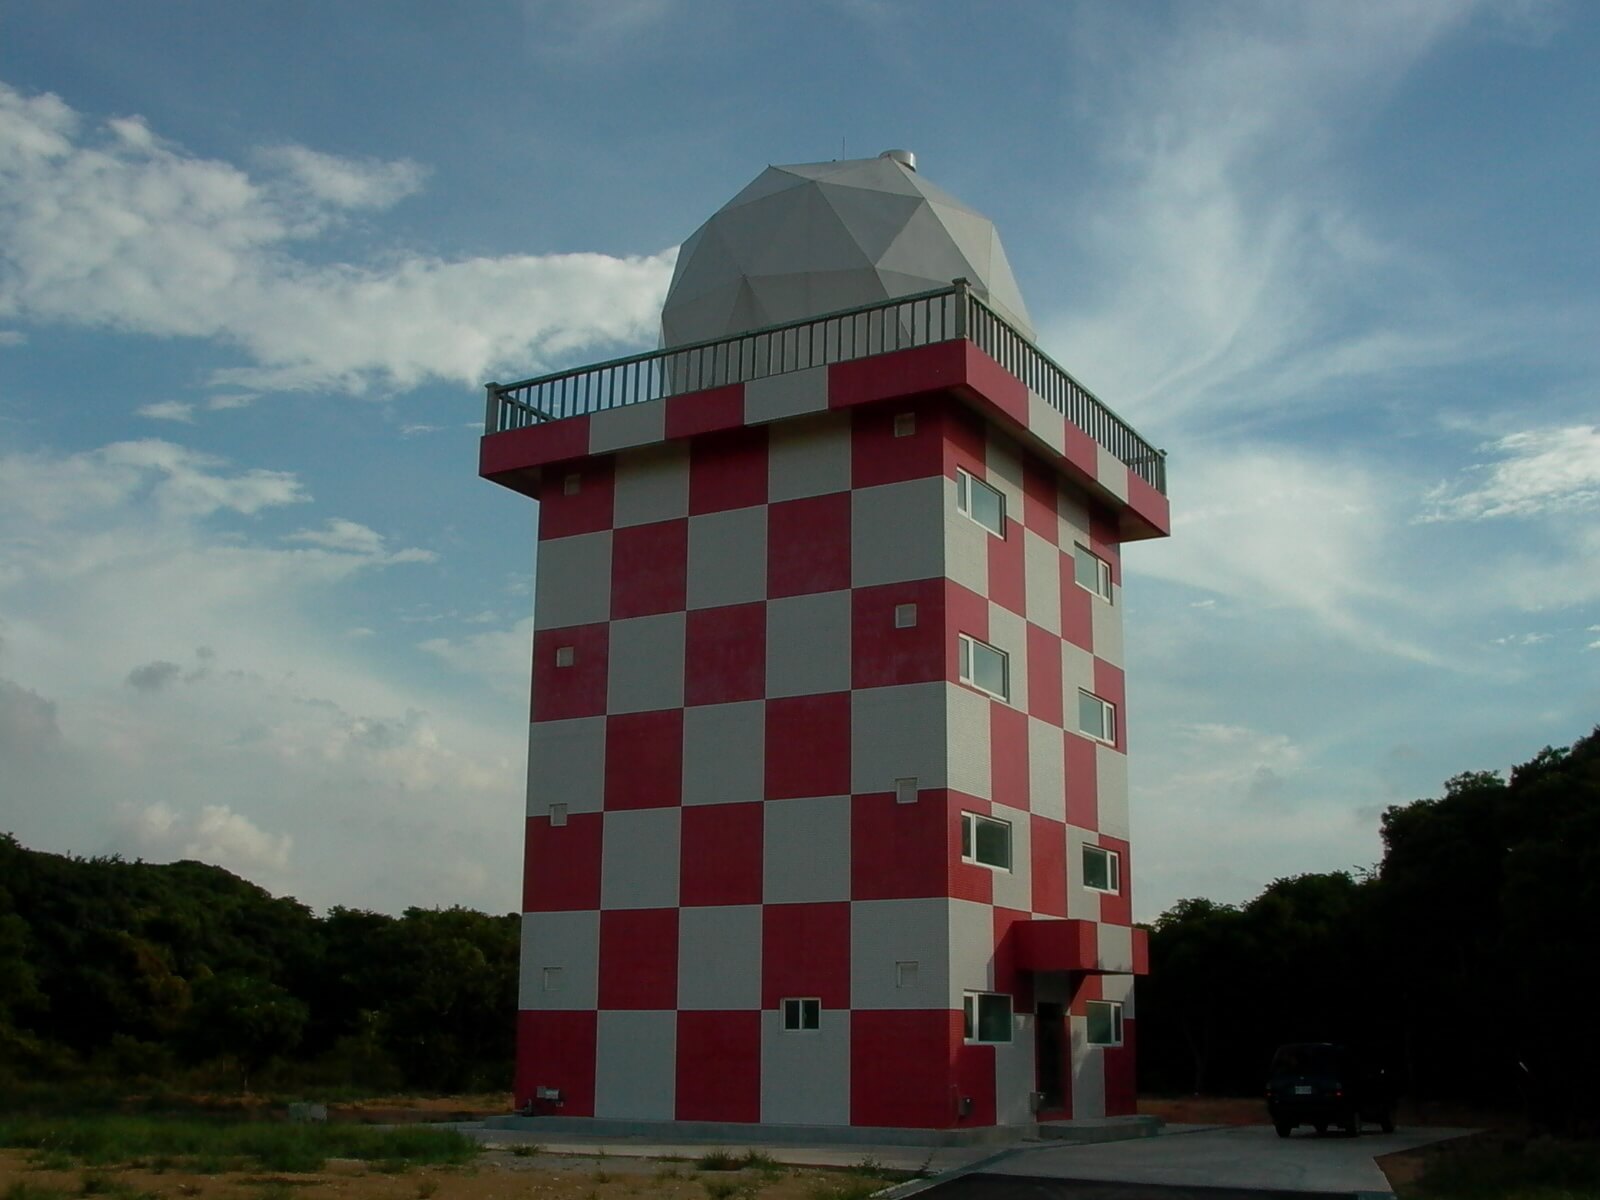 Baron radar that has served the Taiwan airport for over 15 years.